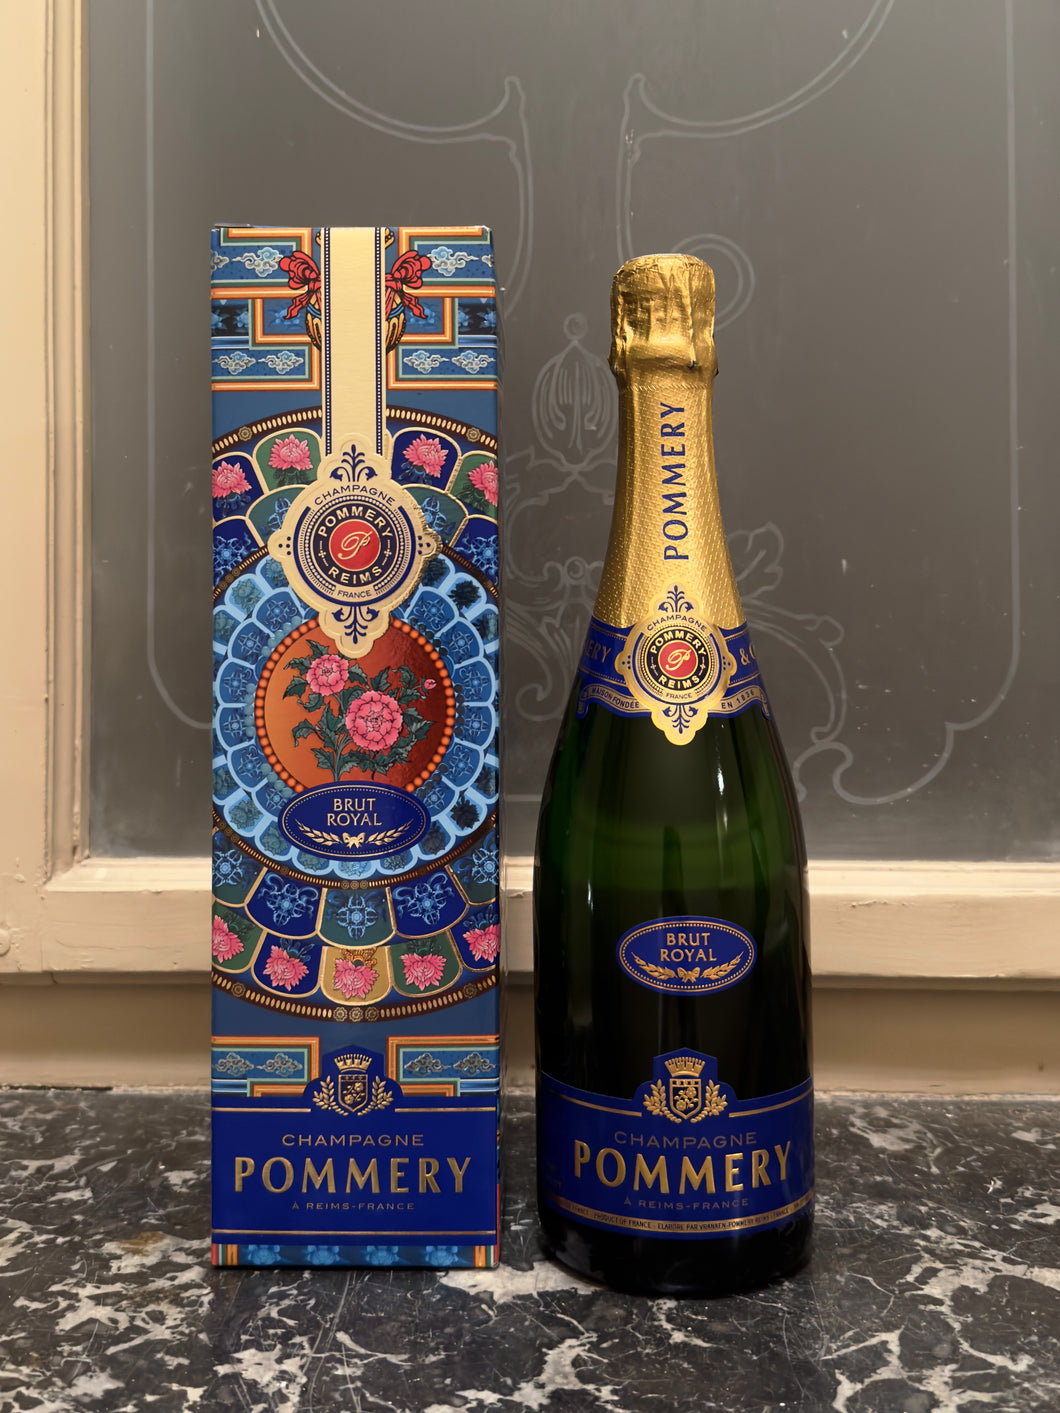 CHAMPAGNE POMMERY BRUT ROYAL LIMITED EDITION 75 cL GIFT BOX